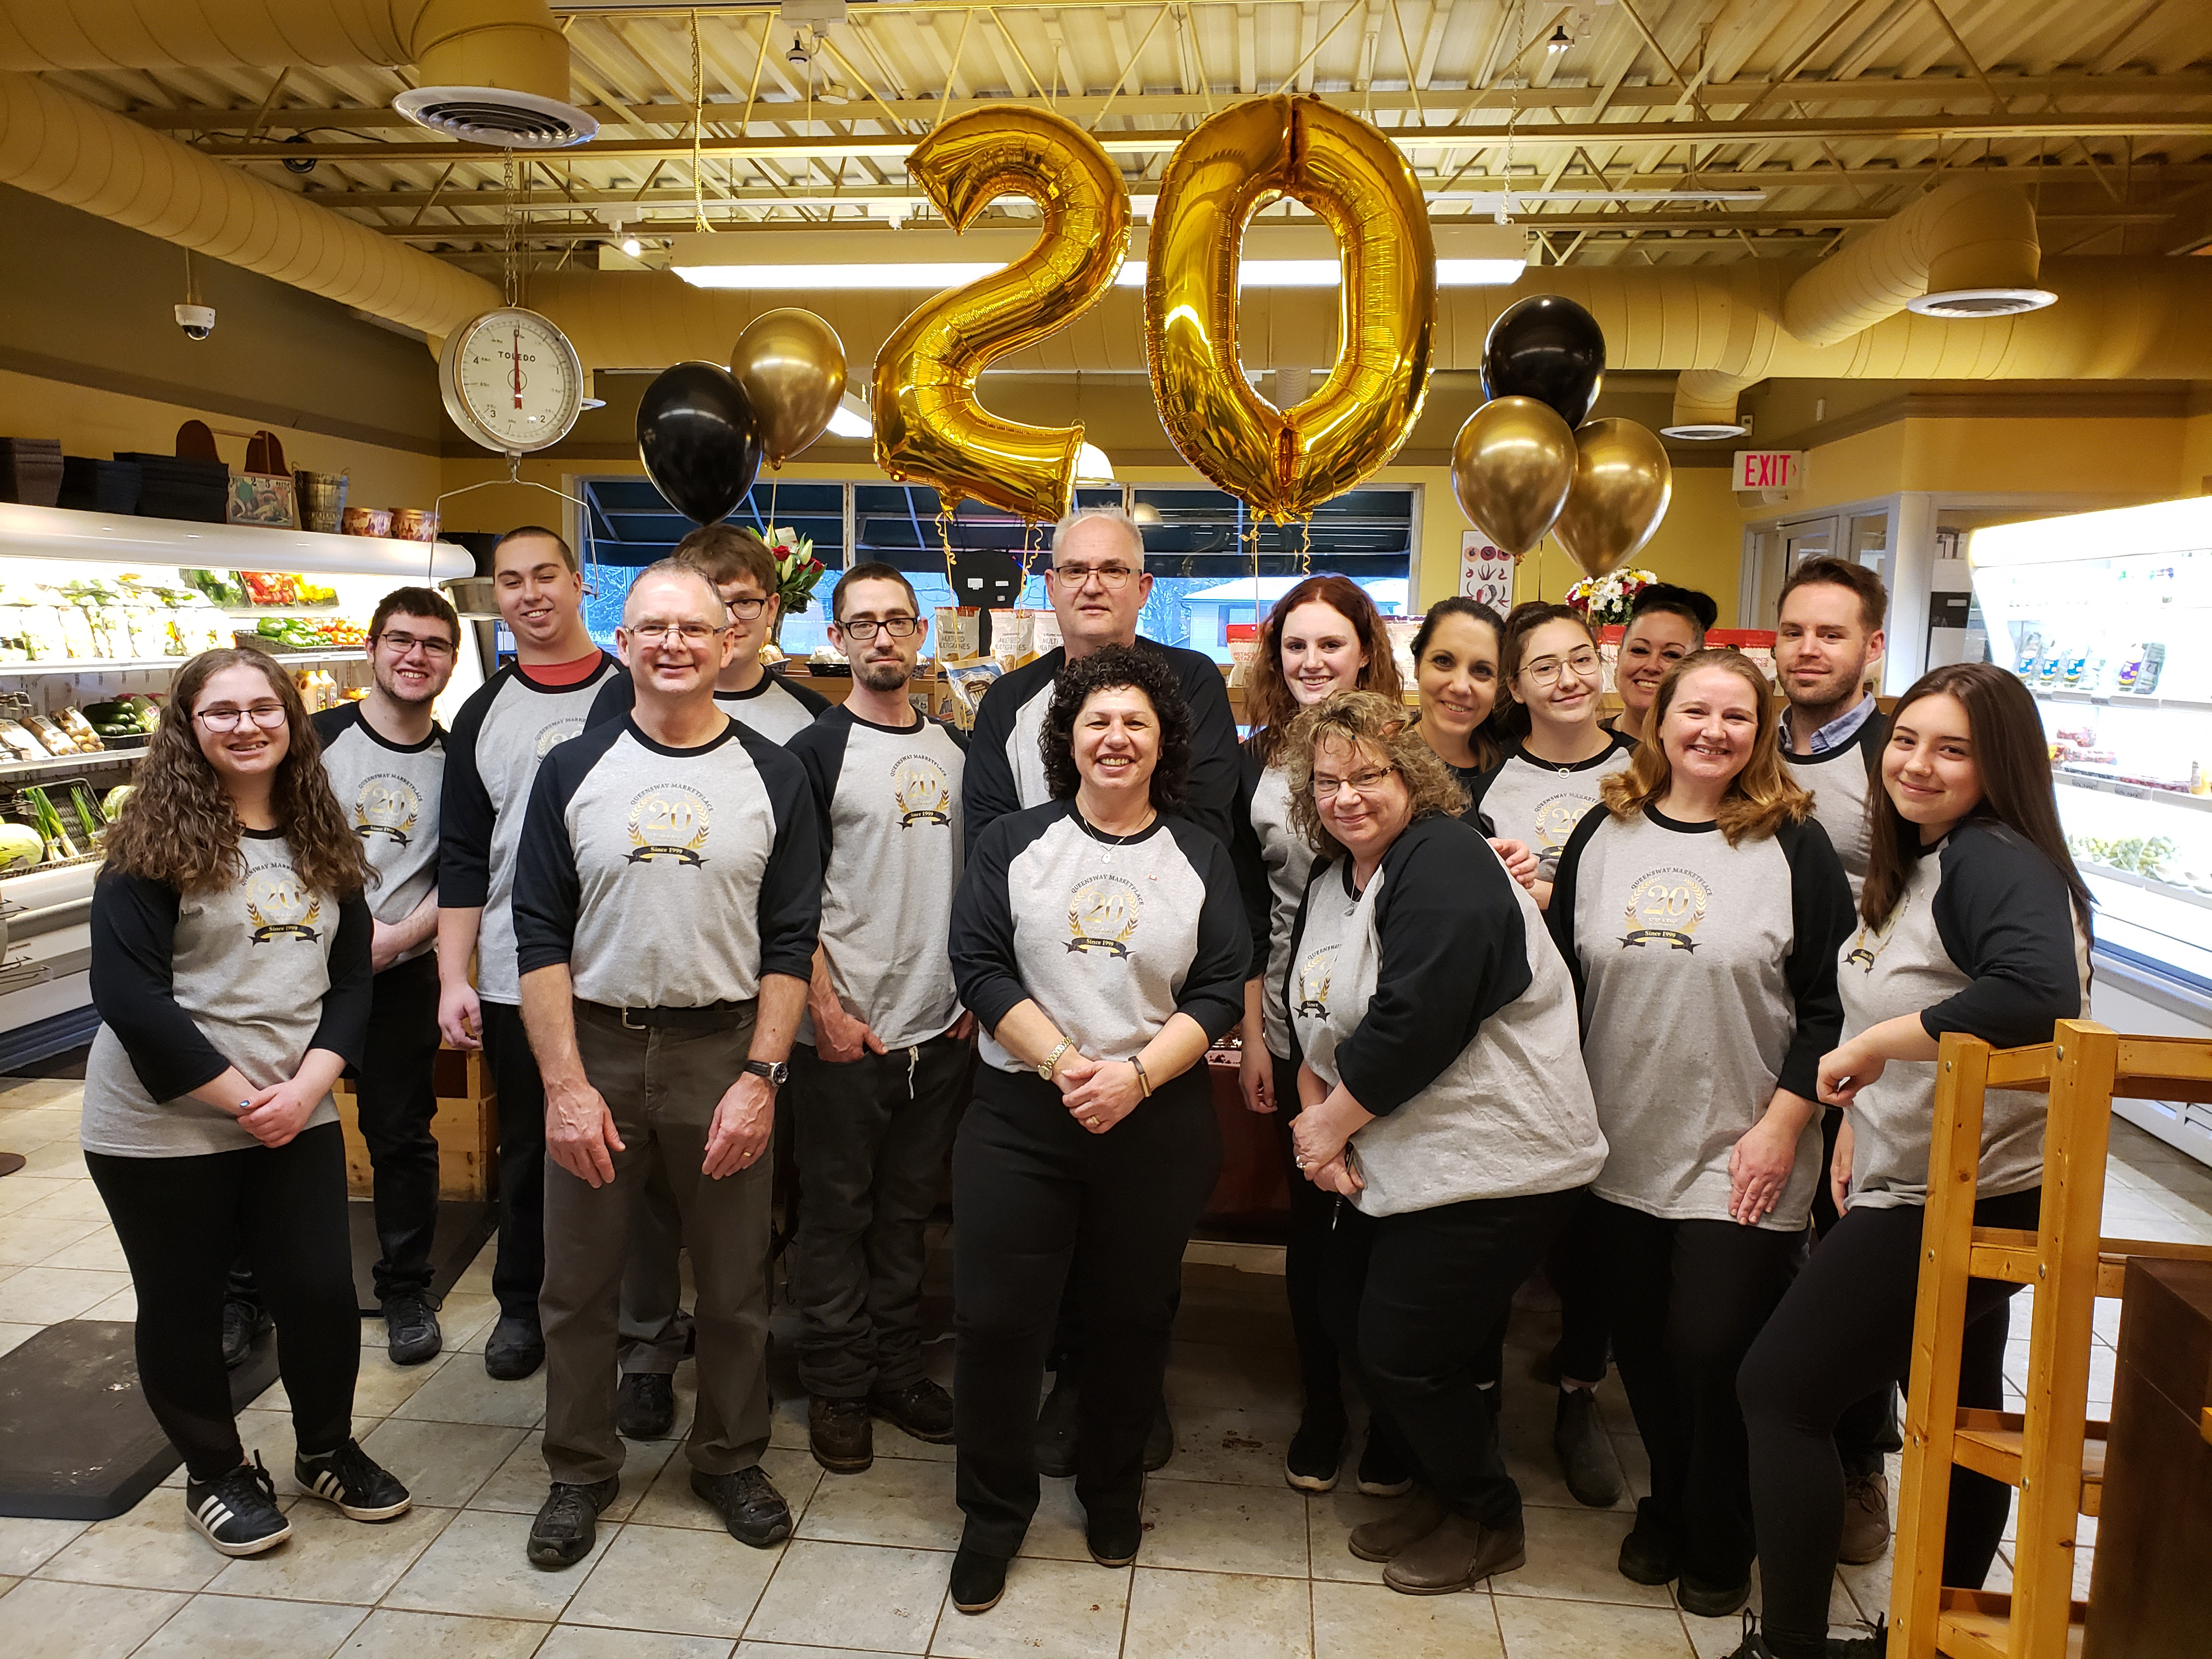 Queensway Marketplace staff at 20th anniversary in Keswick